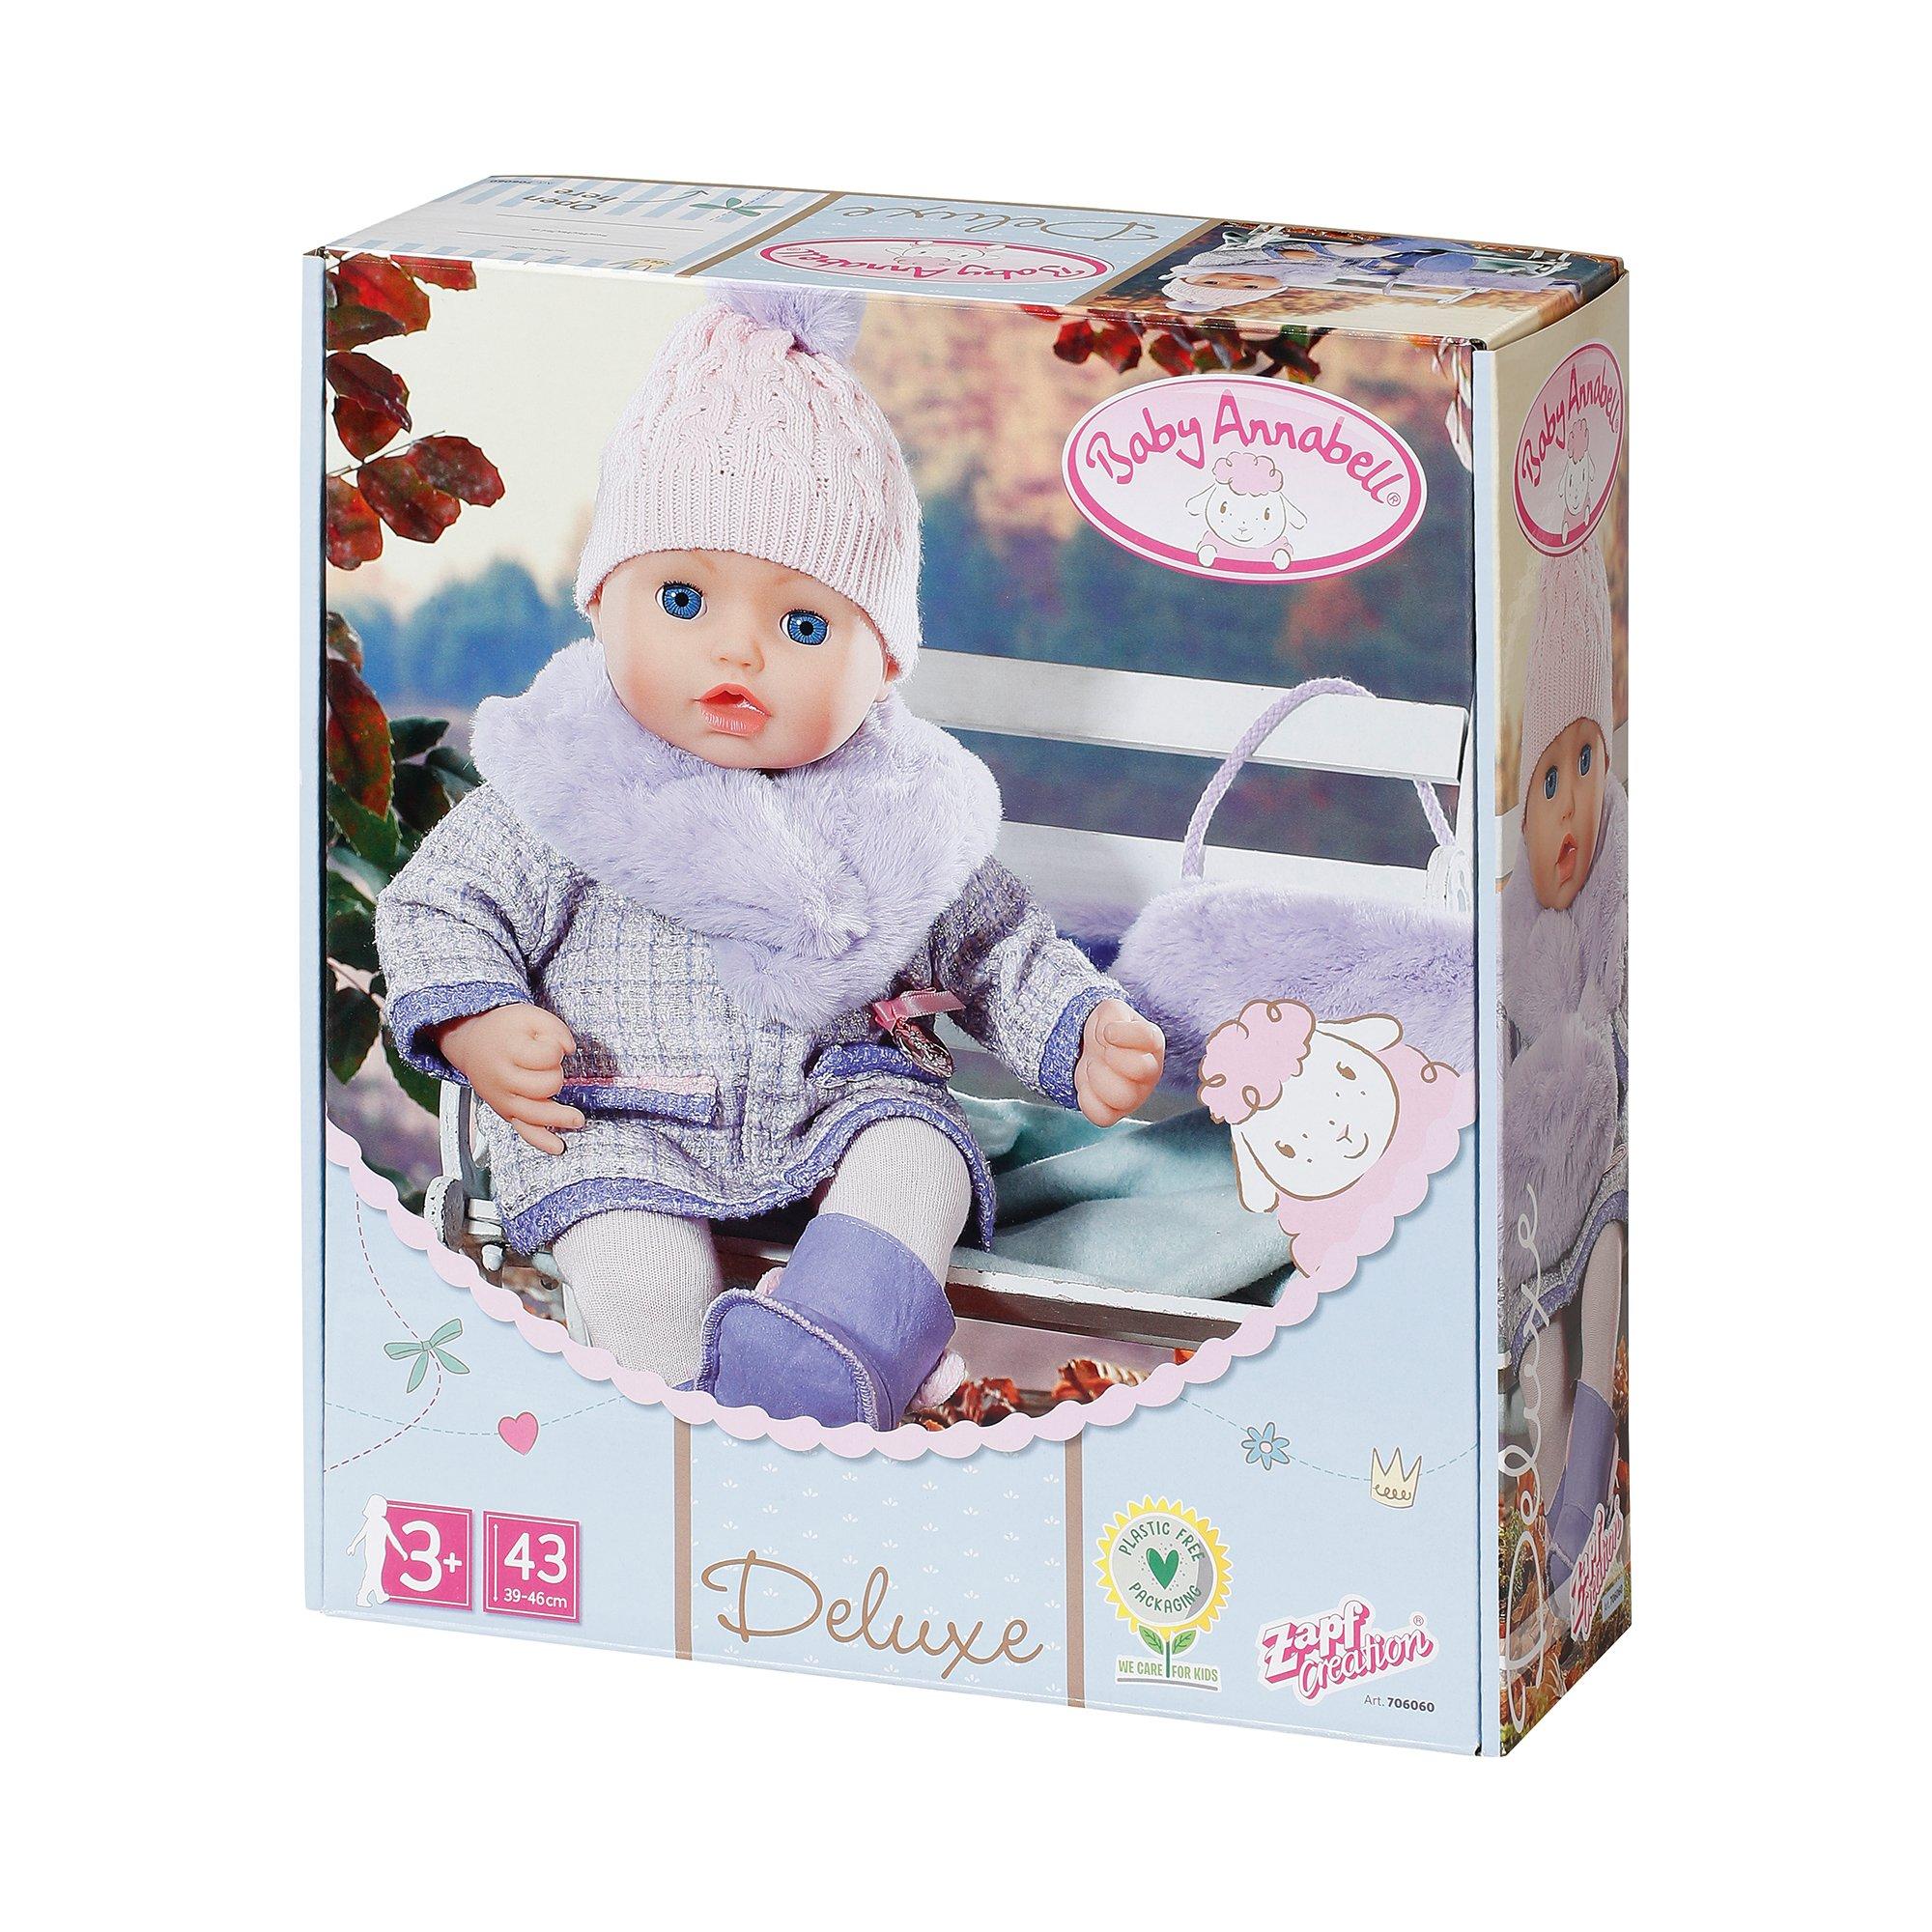 Zapf creation  Baby Annabell Deluxe Mantel 